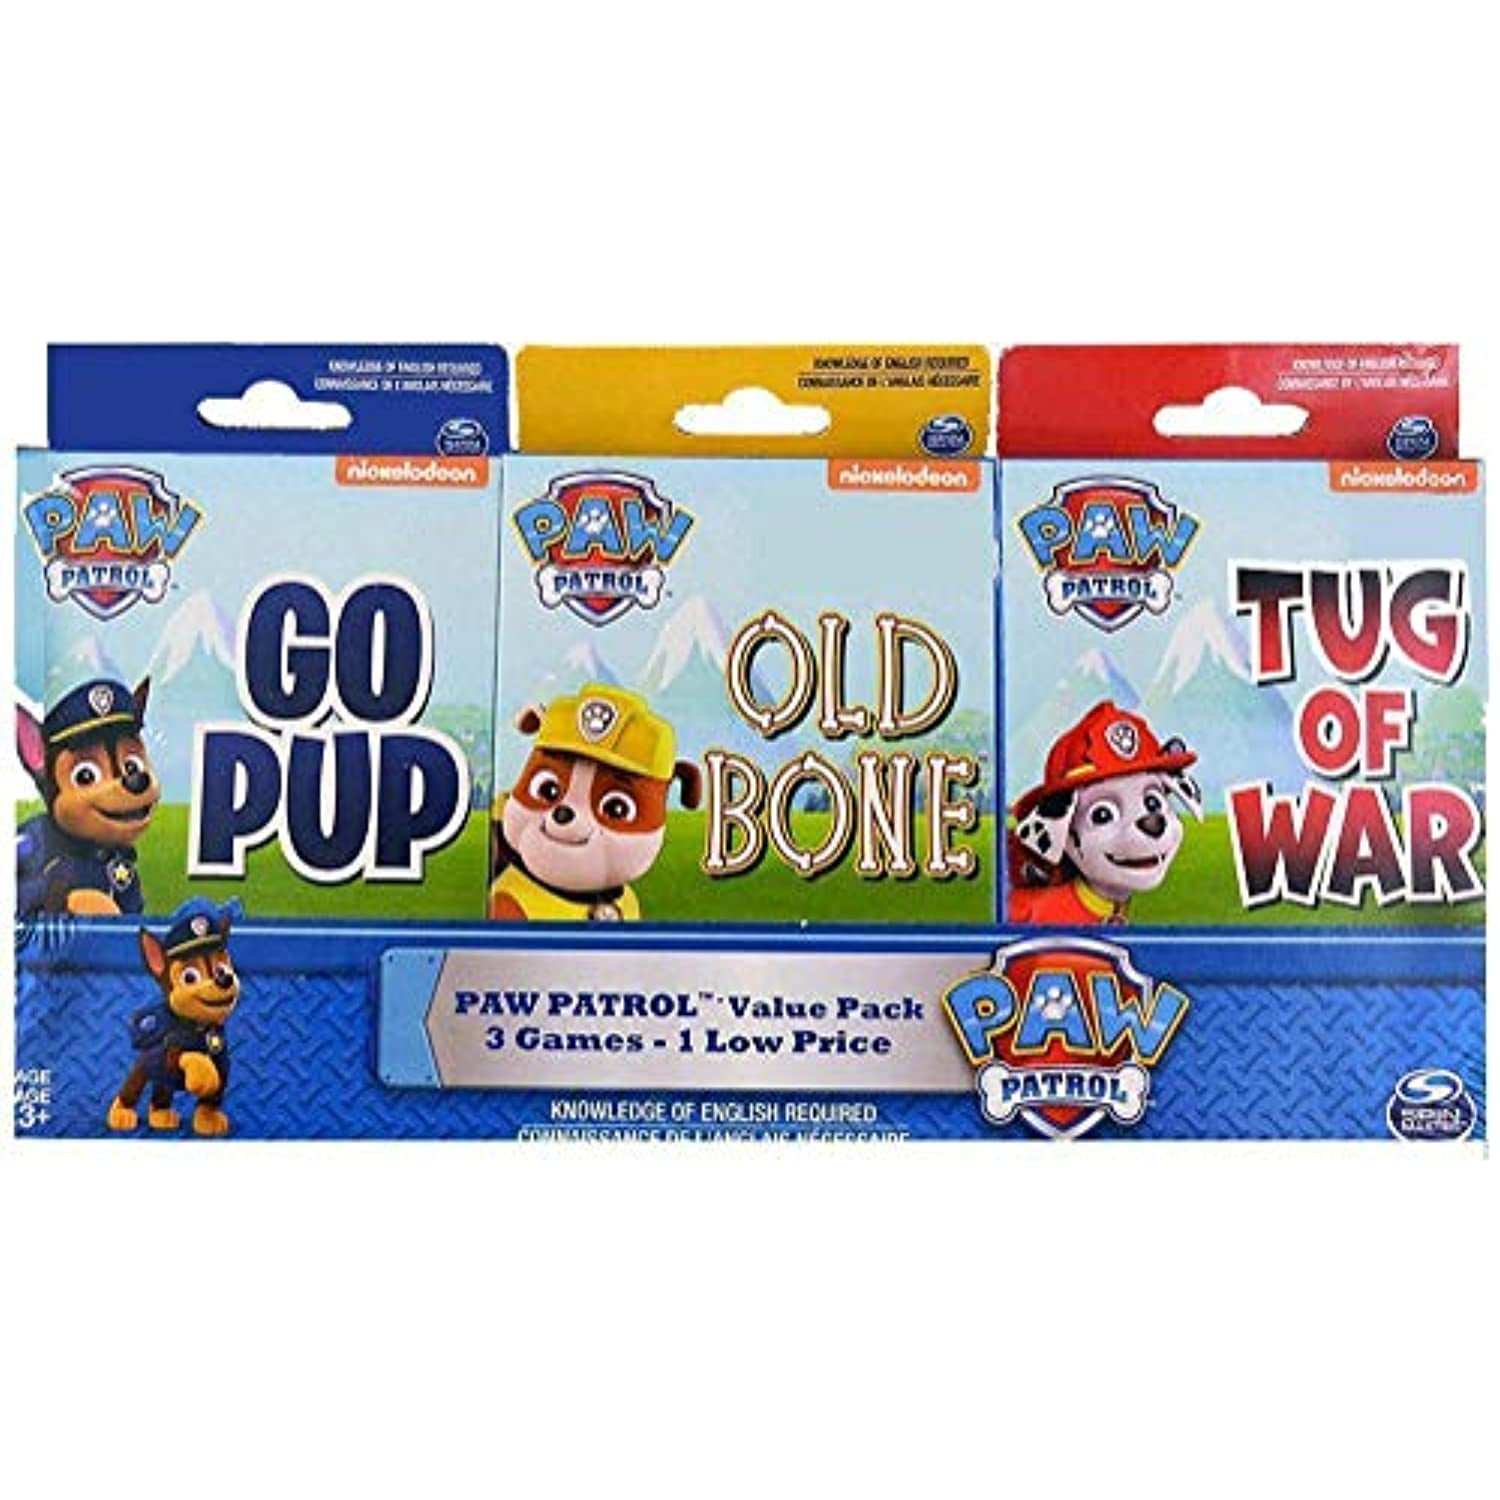 33 Cards Paw Patrol 4 In 1 Card Games By Nickelodeon Shuffle Games Brand New 